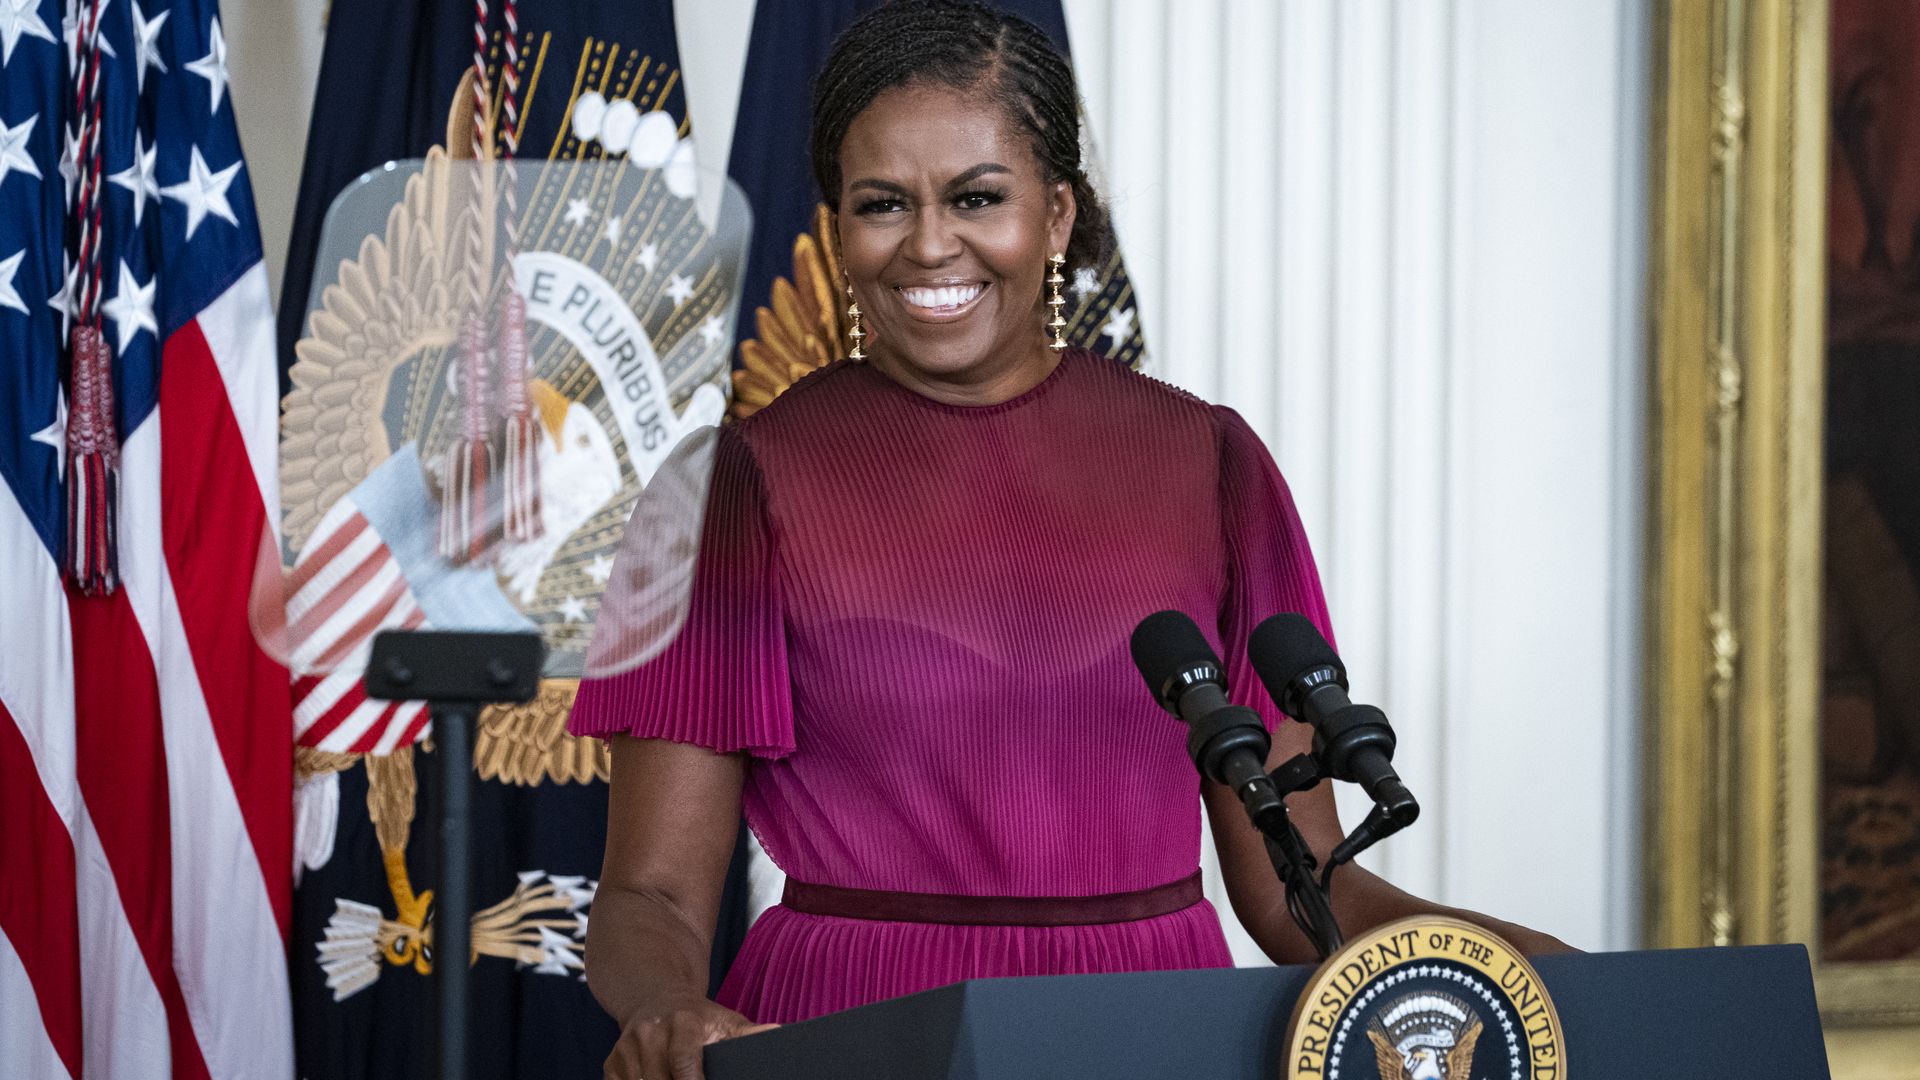 Former US First Lady Michelle Obama speaks during a ceremony for the unveiling of her official White House portrait in Washington, D.C., US, on Wednesday, Sept. 7.